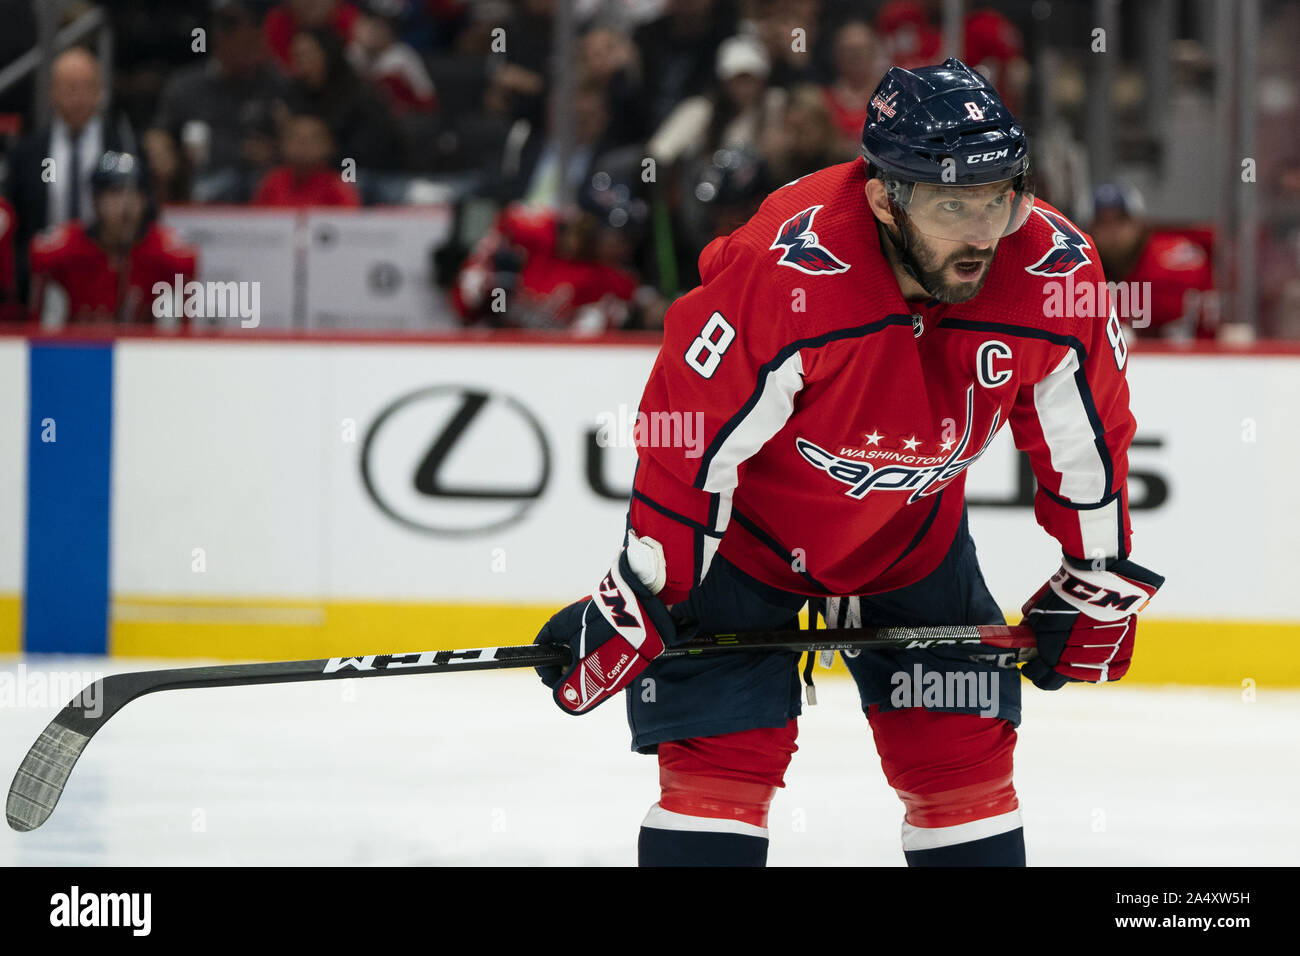 Washington, United States. 16th Oct, 2019. Washington Capitals left wing Alex Ovechkin (8) looks on after a stoppage in play during the second period at Capital One Arena in Washington, DC on Wednesday, October 16, 2019. The Capitals host the Toronto Maple Leafs to start a 3 game home stand tonight. Photo by Alex Edelman/UPI Credit: UPI/Alamy Live News Stock Photo